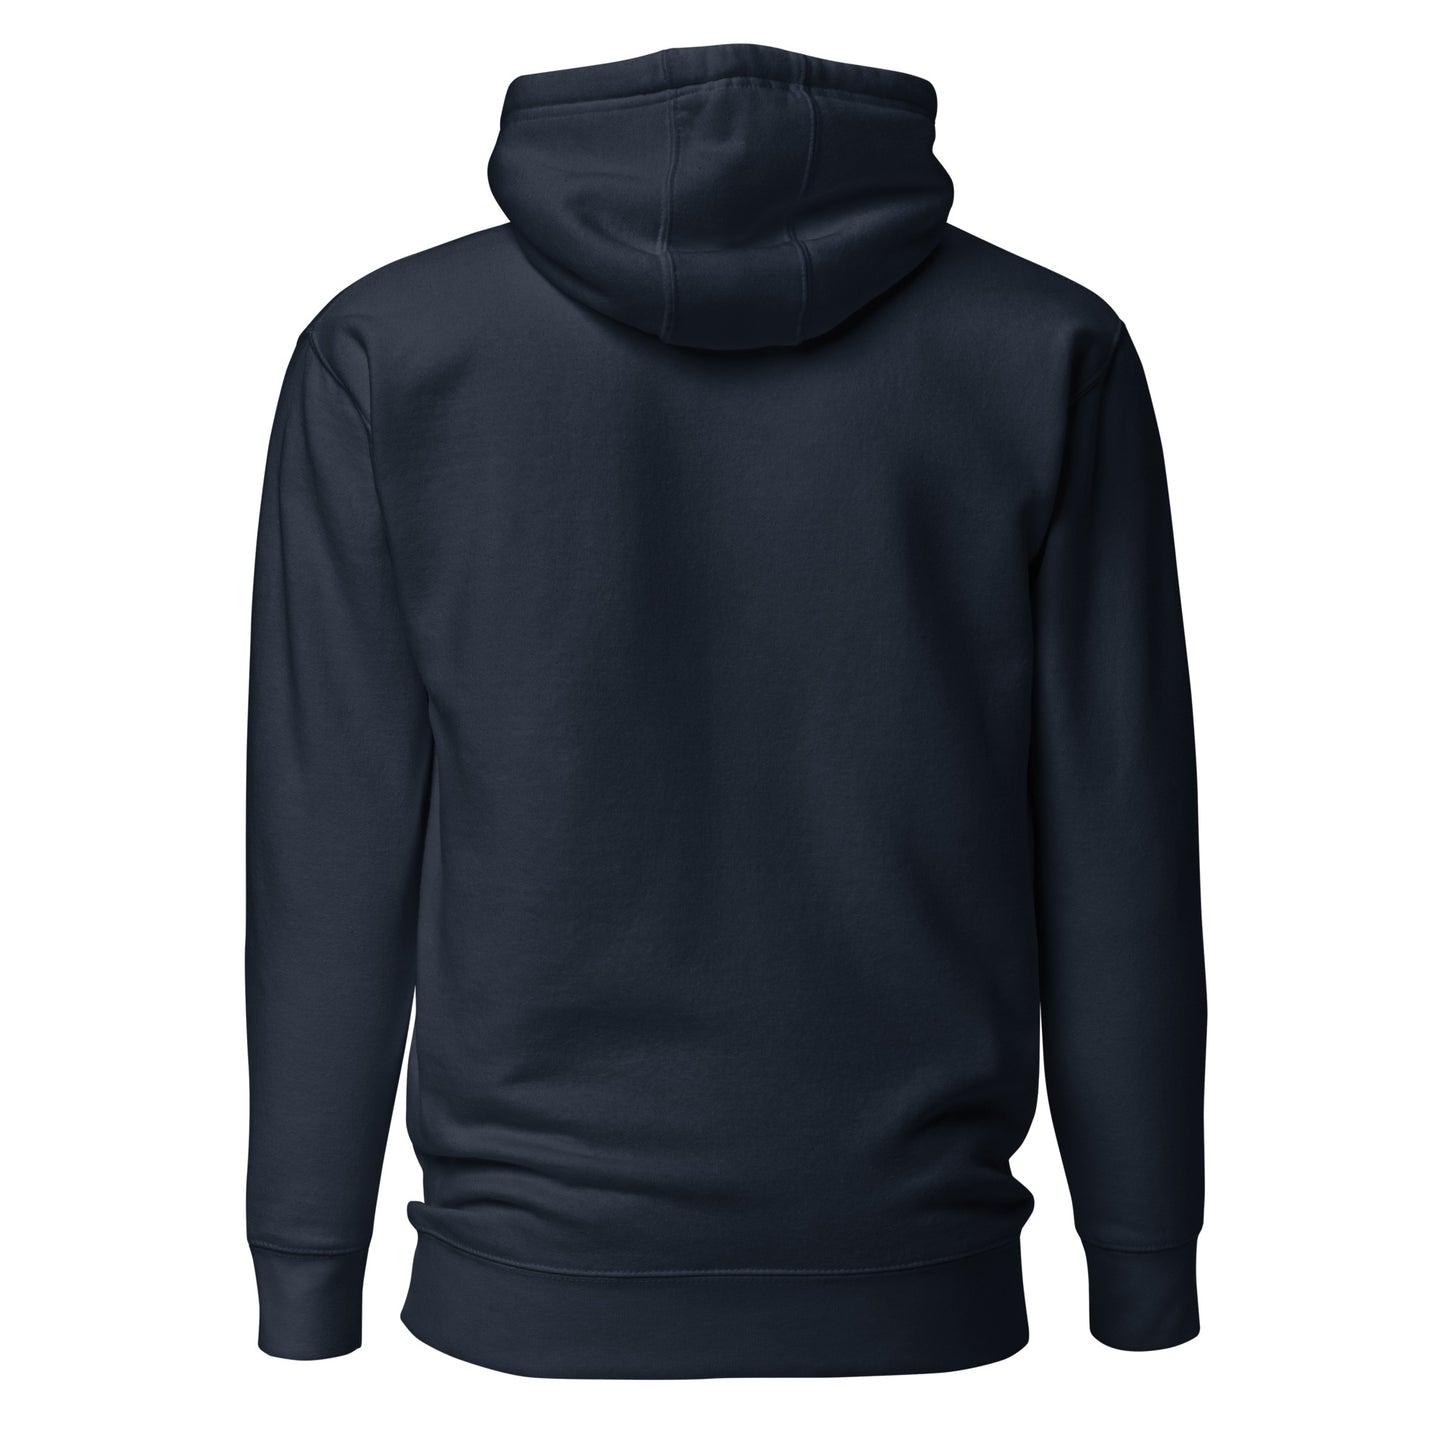 Capital Gains Entrepreneur Hoodie for Startup Owners